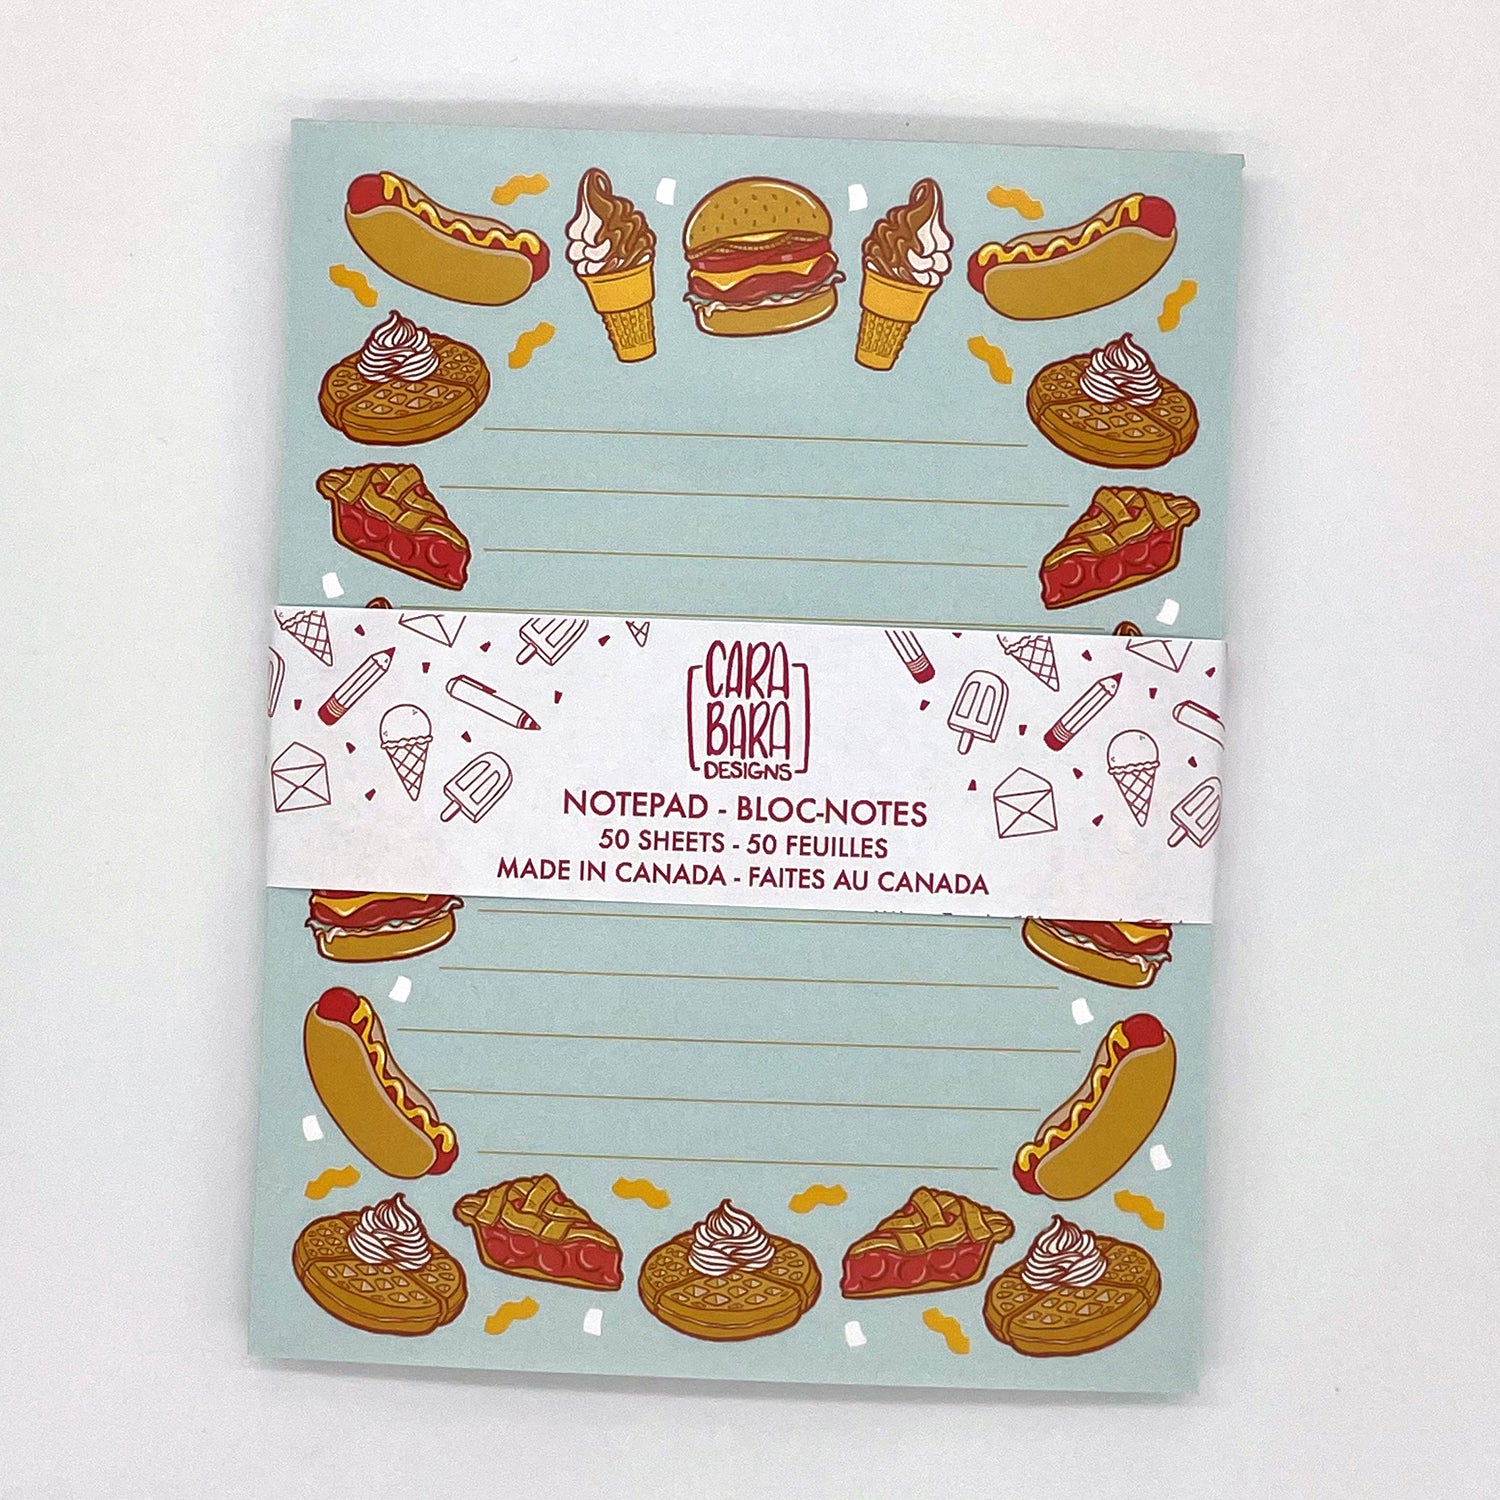 A blue lined notepad features illustrations of burgers, hot dogs, waffles, ice cream and pie. The notepad is packaged in a belly band featuring the Carabara Designs logo and indicating the notepad is 50 pages and made in Canada.